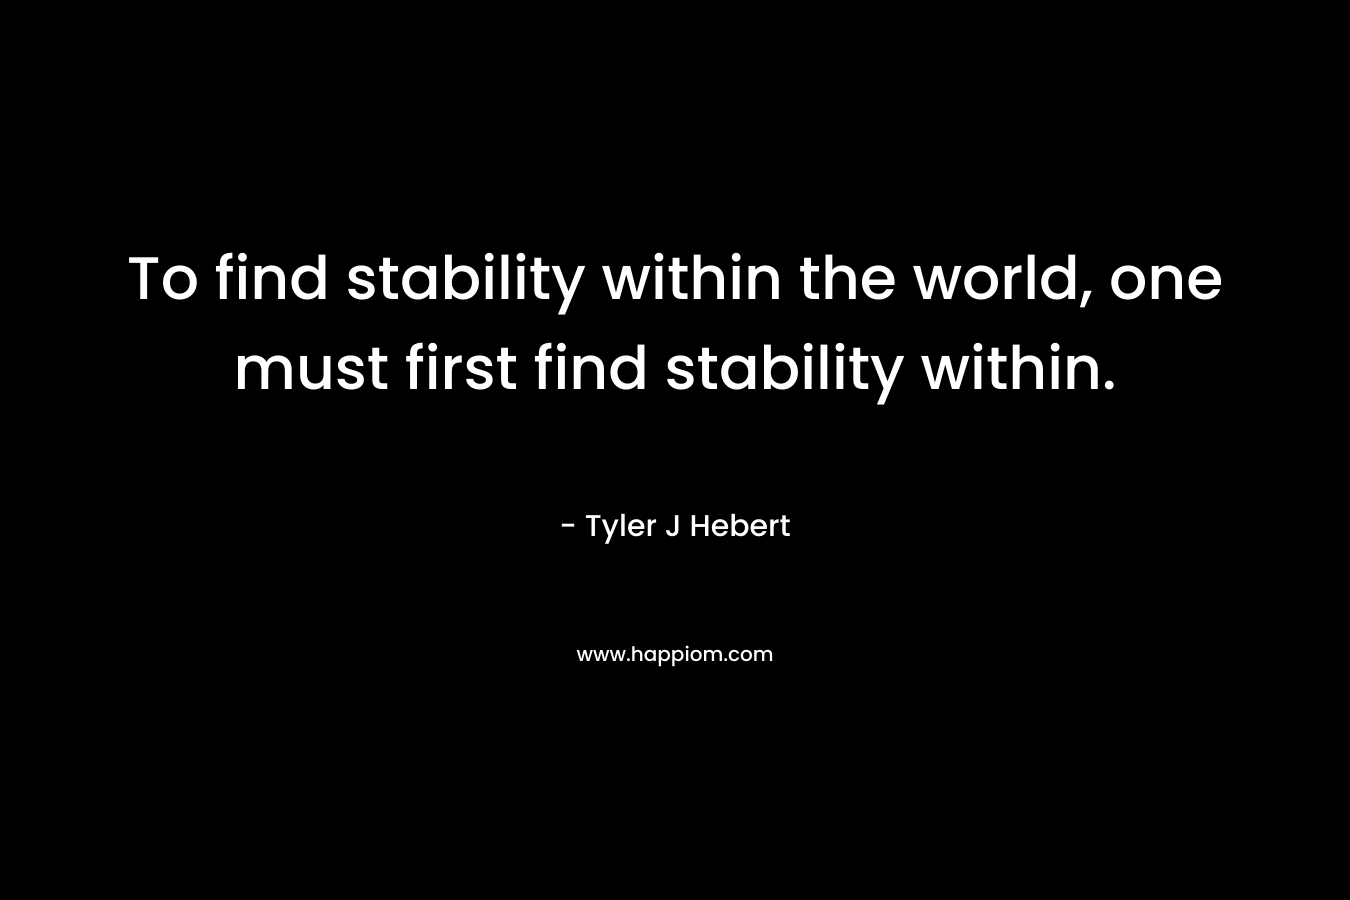 To find stability within the world, one must first find stability within.